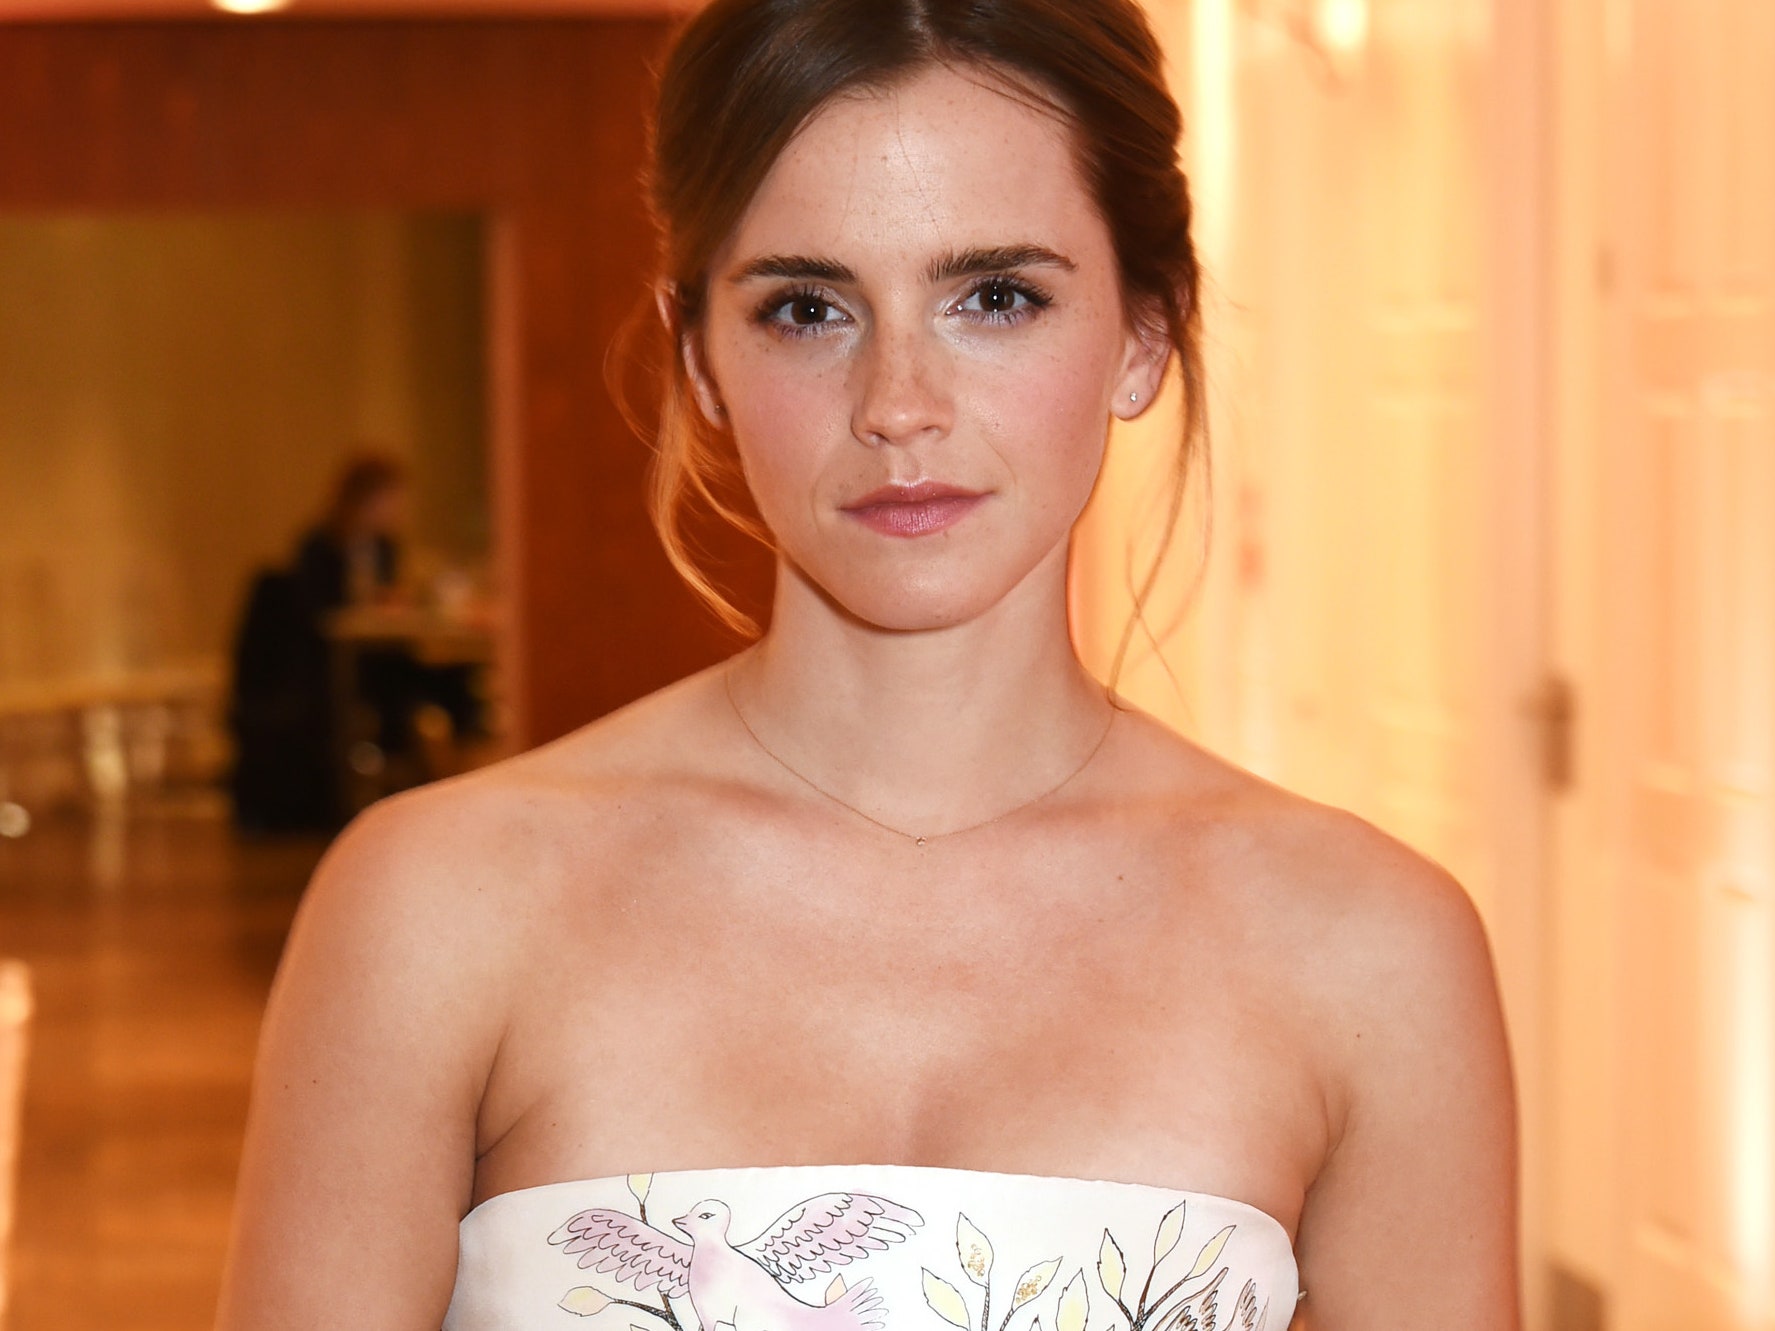 donald buisson recommends emma watson x rated pic